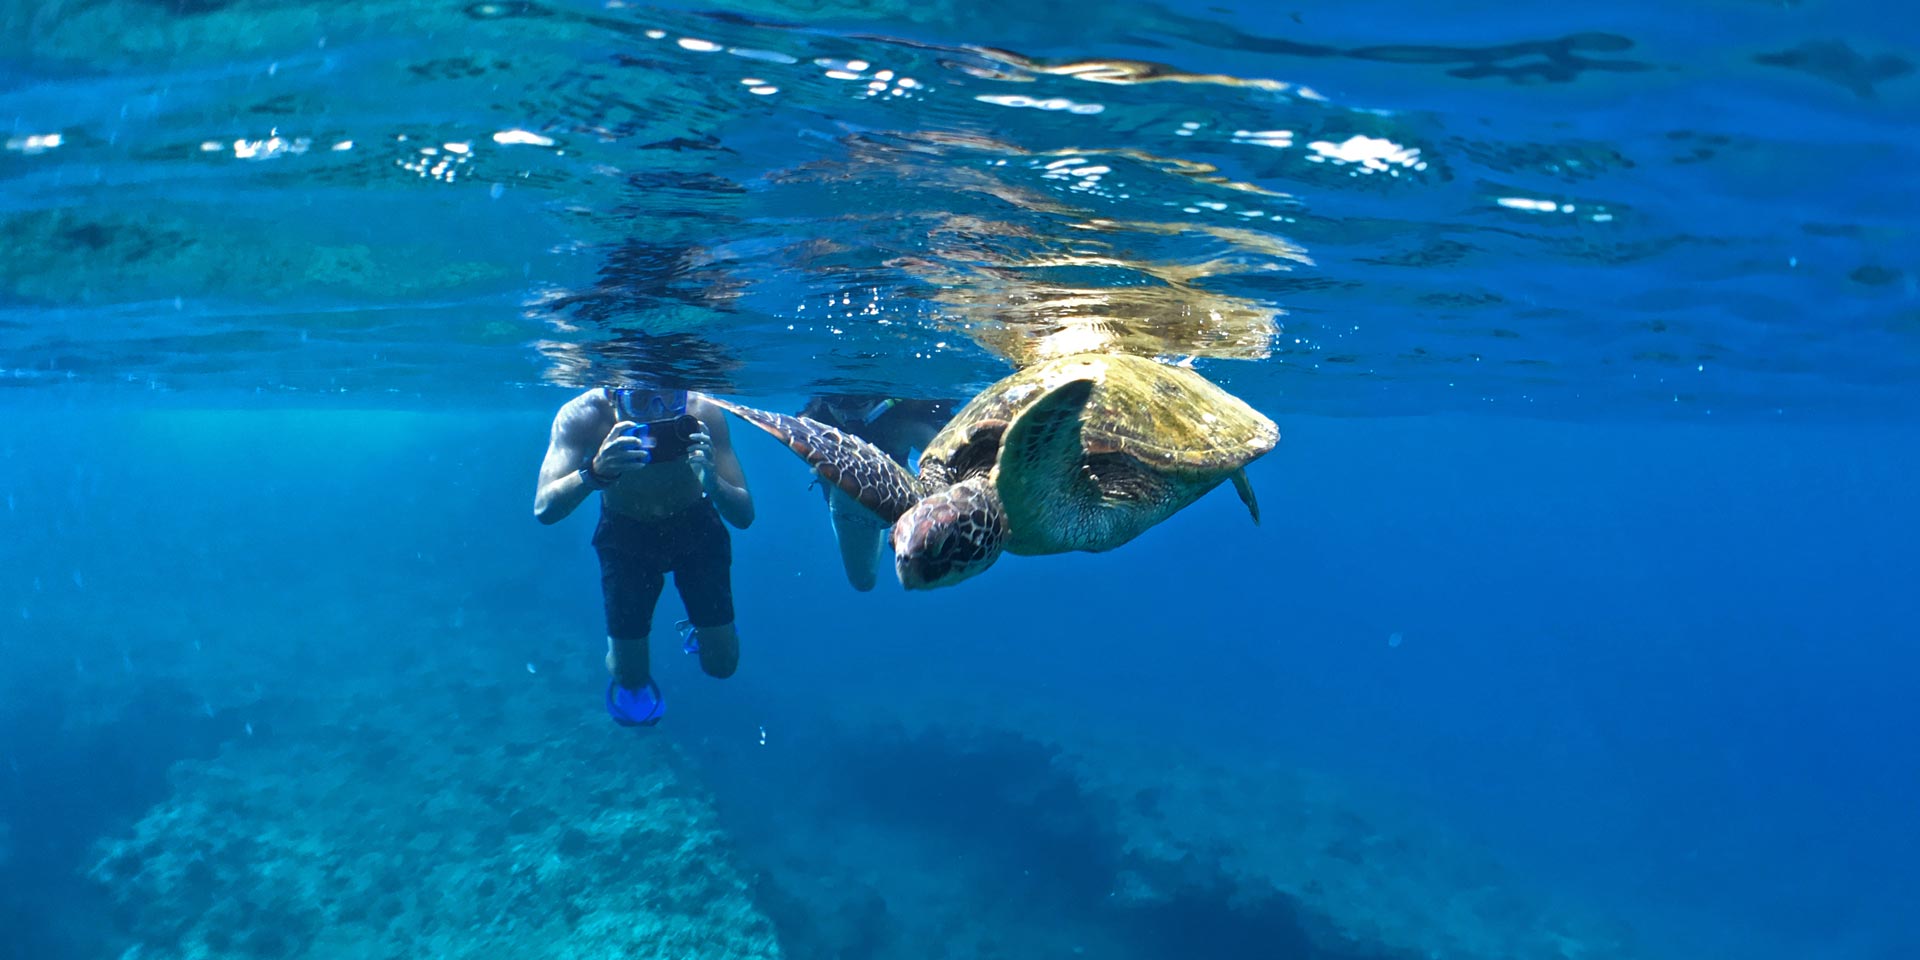 North Shore Oahu snorkeling tour with sea turtles